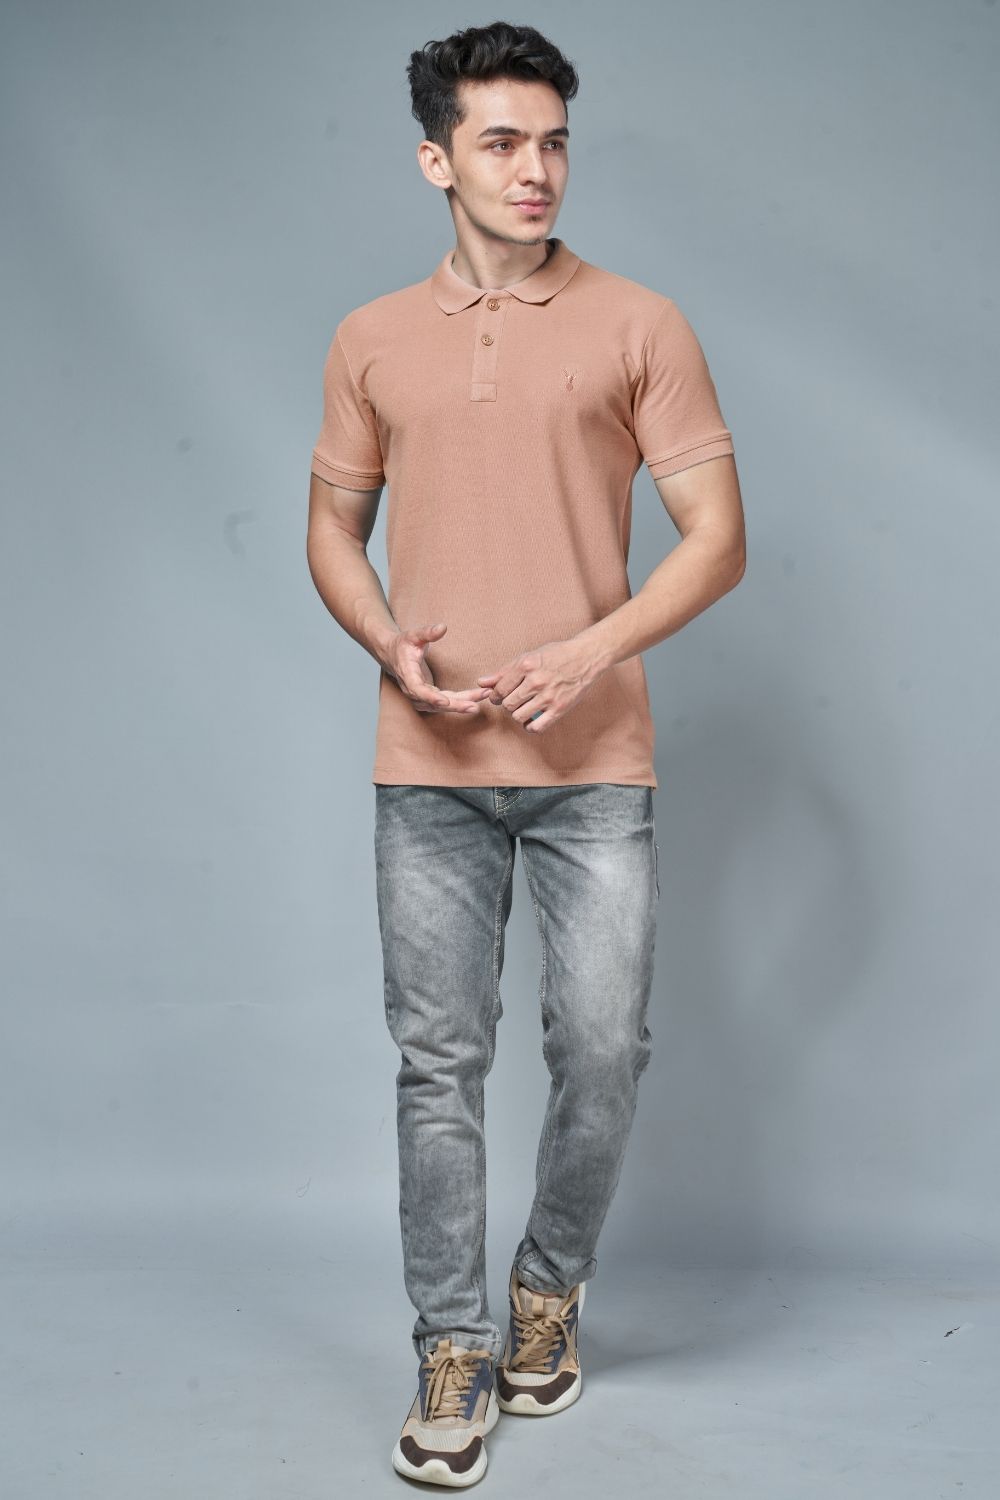 Bisque colored, identity Polo T-shirts for men with collar and half sleeves, full view.